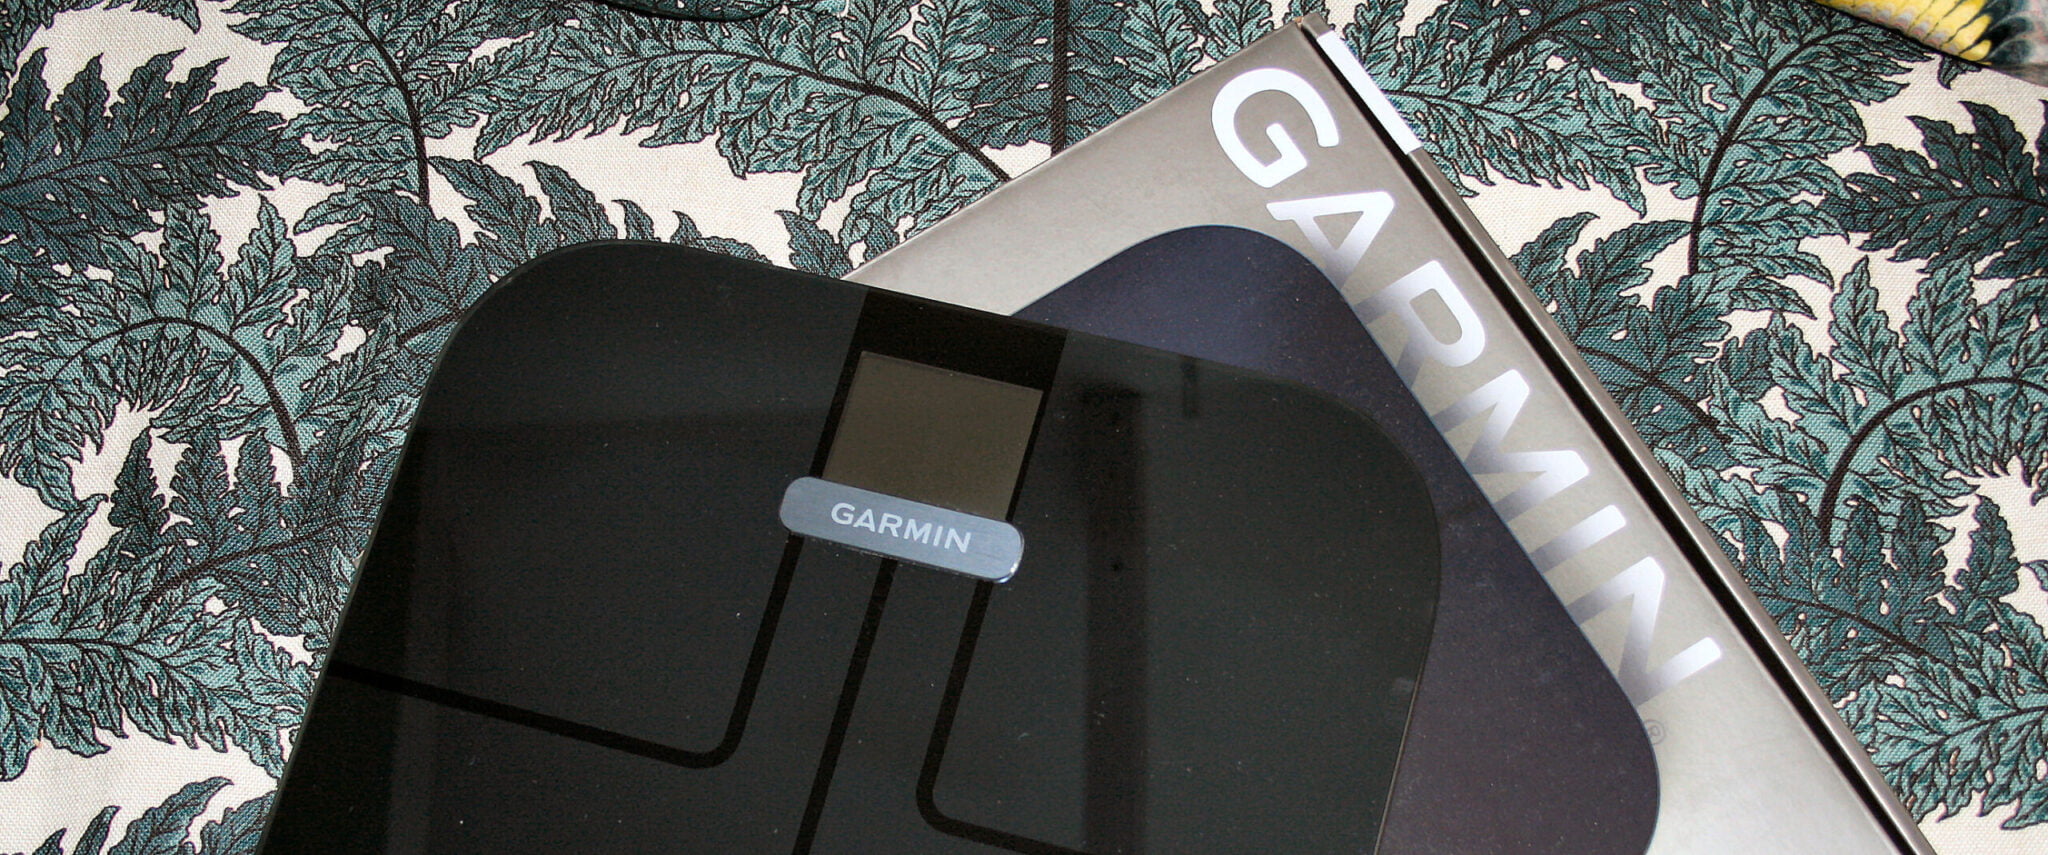 Garmin Index S2 Review | Smart Scale 2, WiFi Version 2021 Update